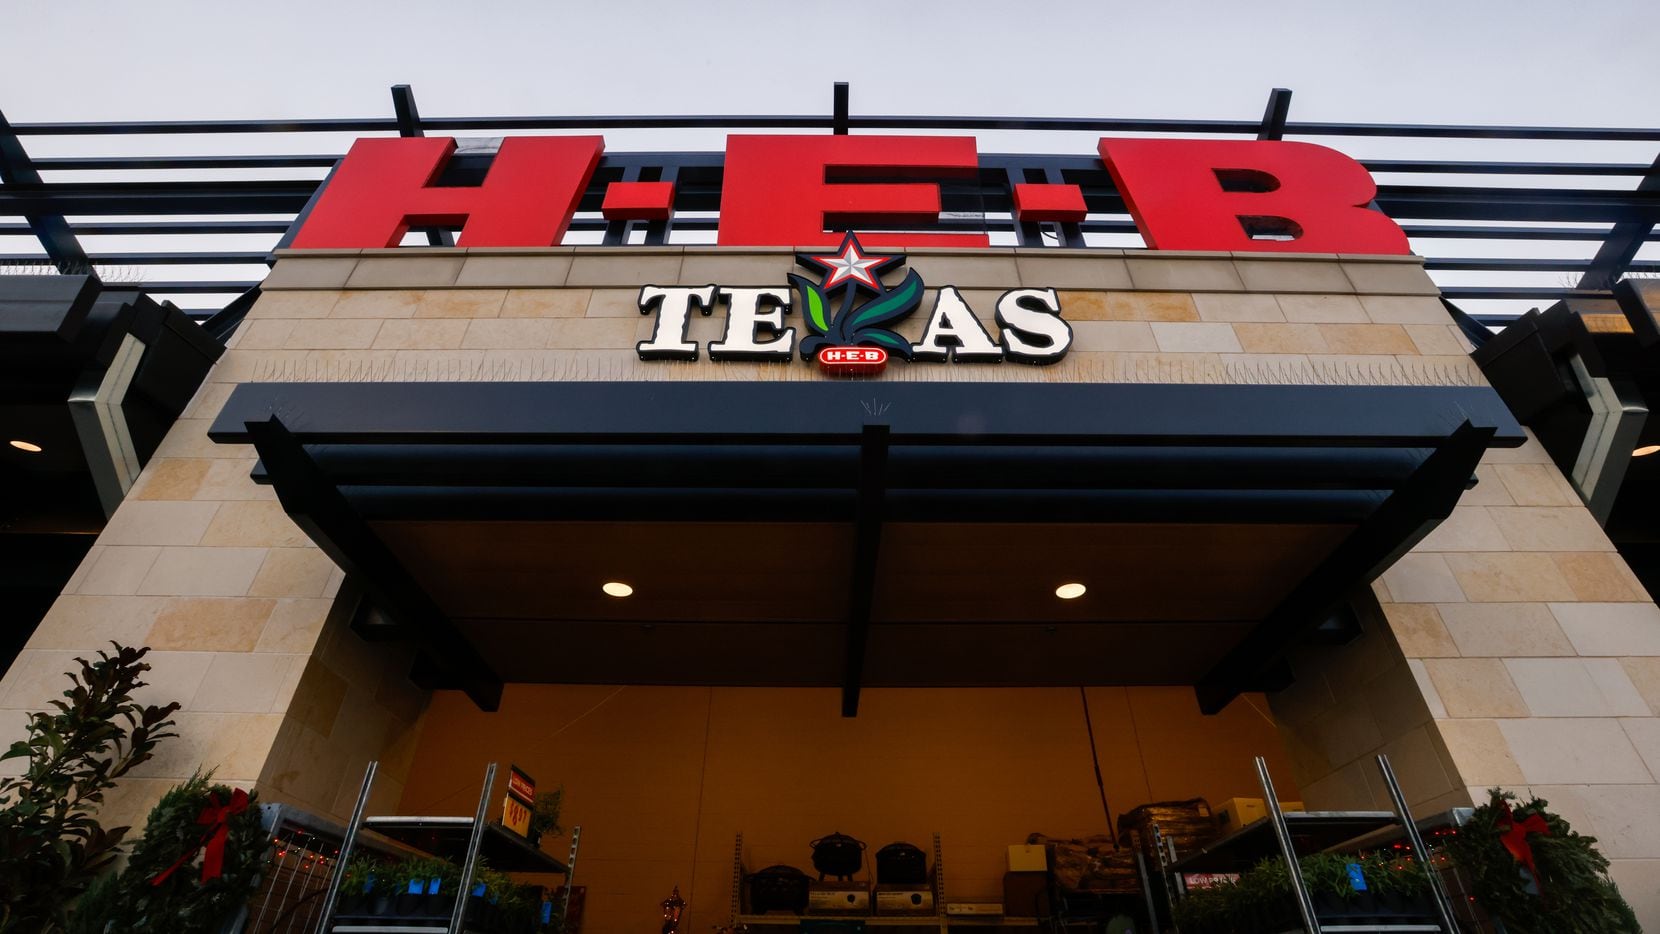 Within the Dallas area, H-E-B has opened stores in Frisco and Plano so far. Locations in...